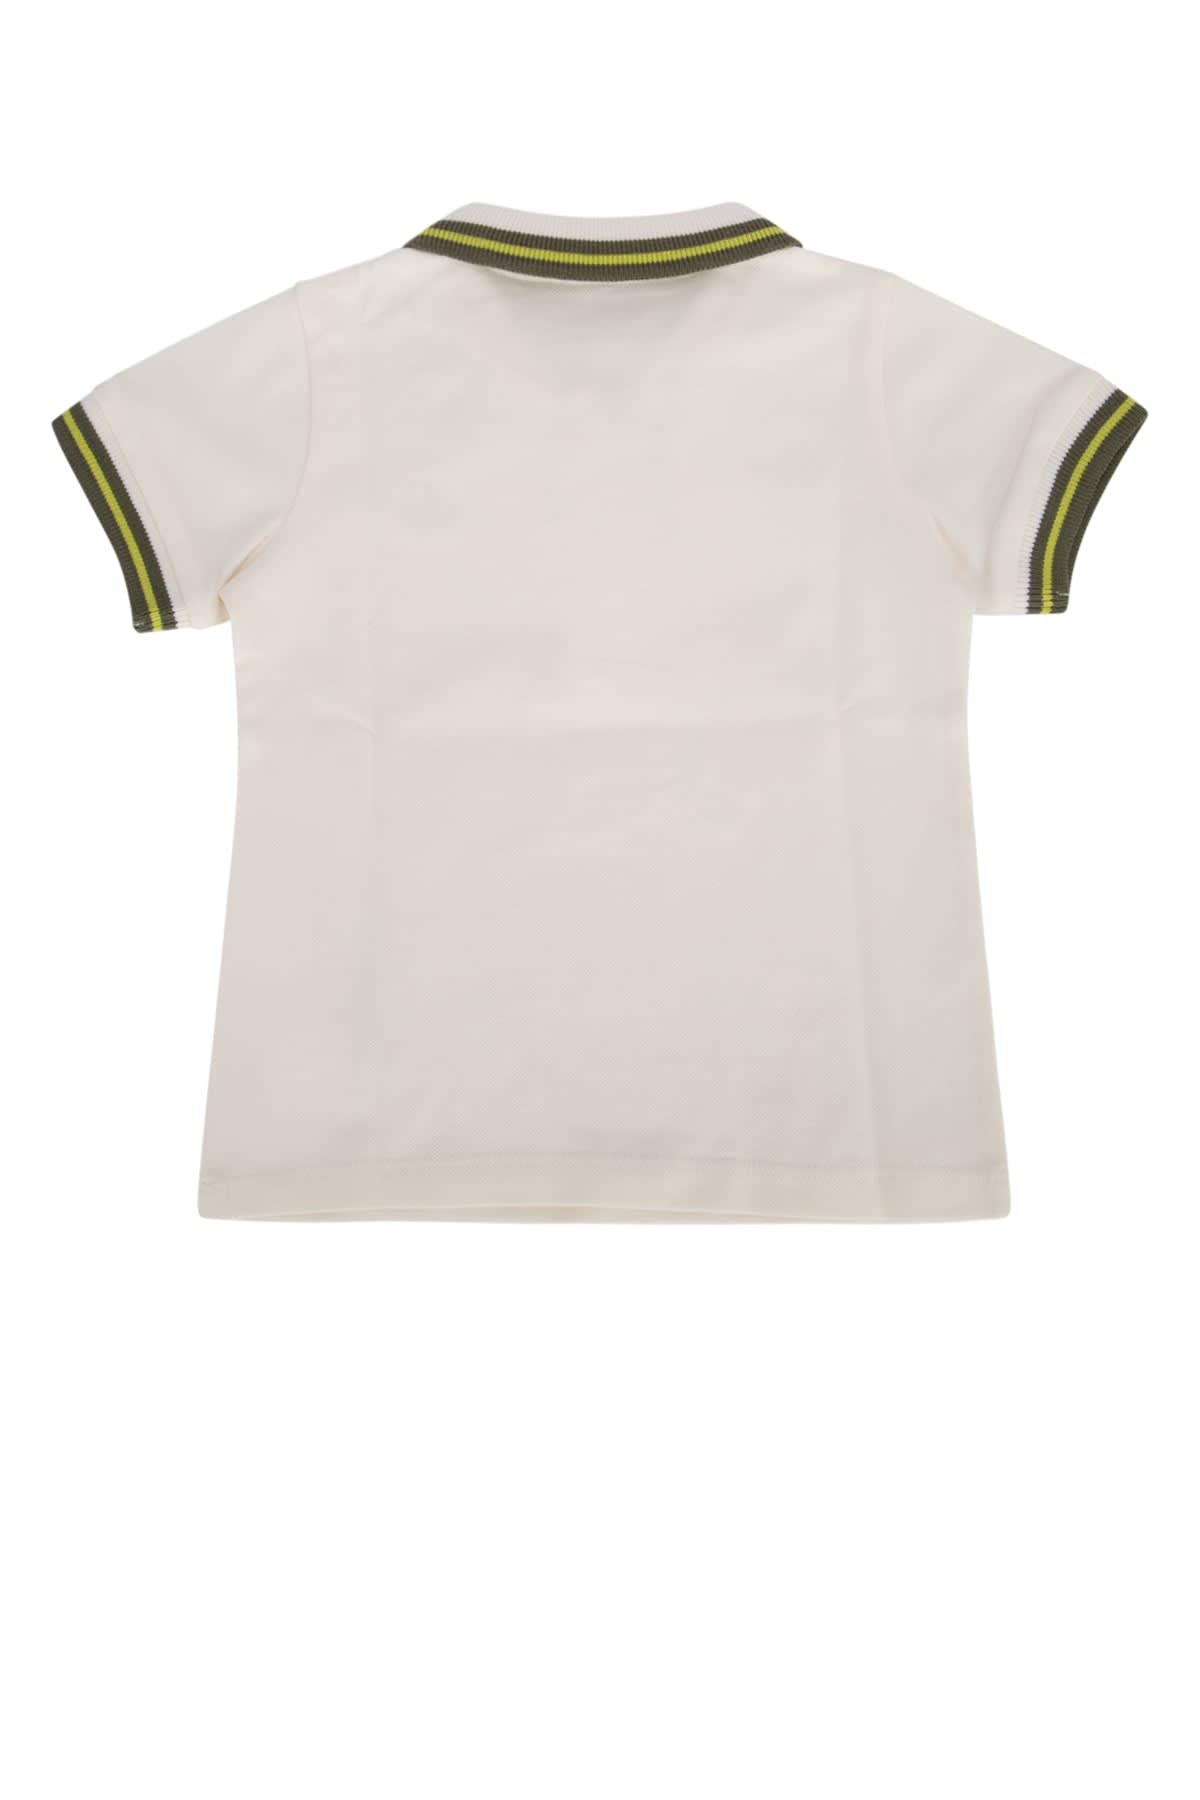 Moncler Kids' Polo In F08